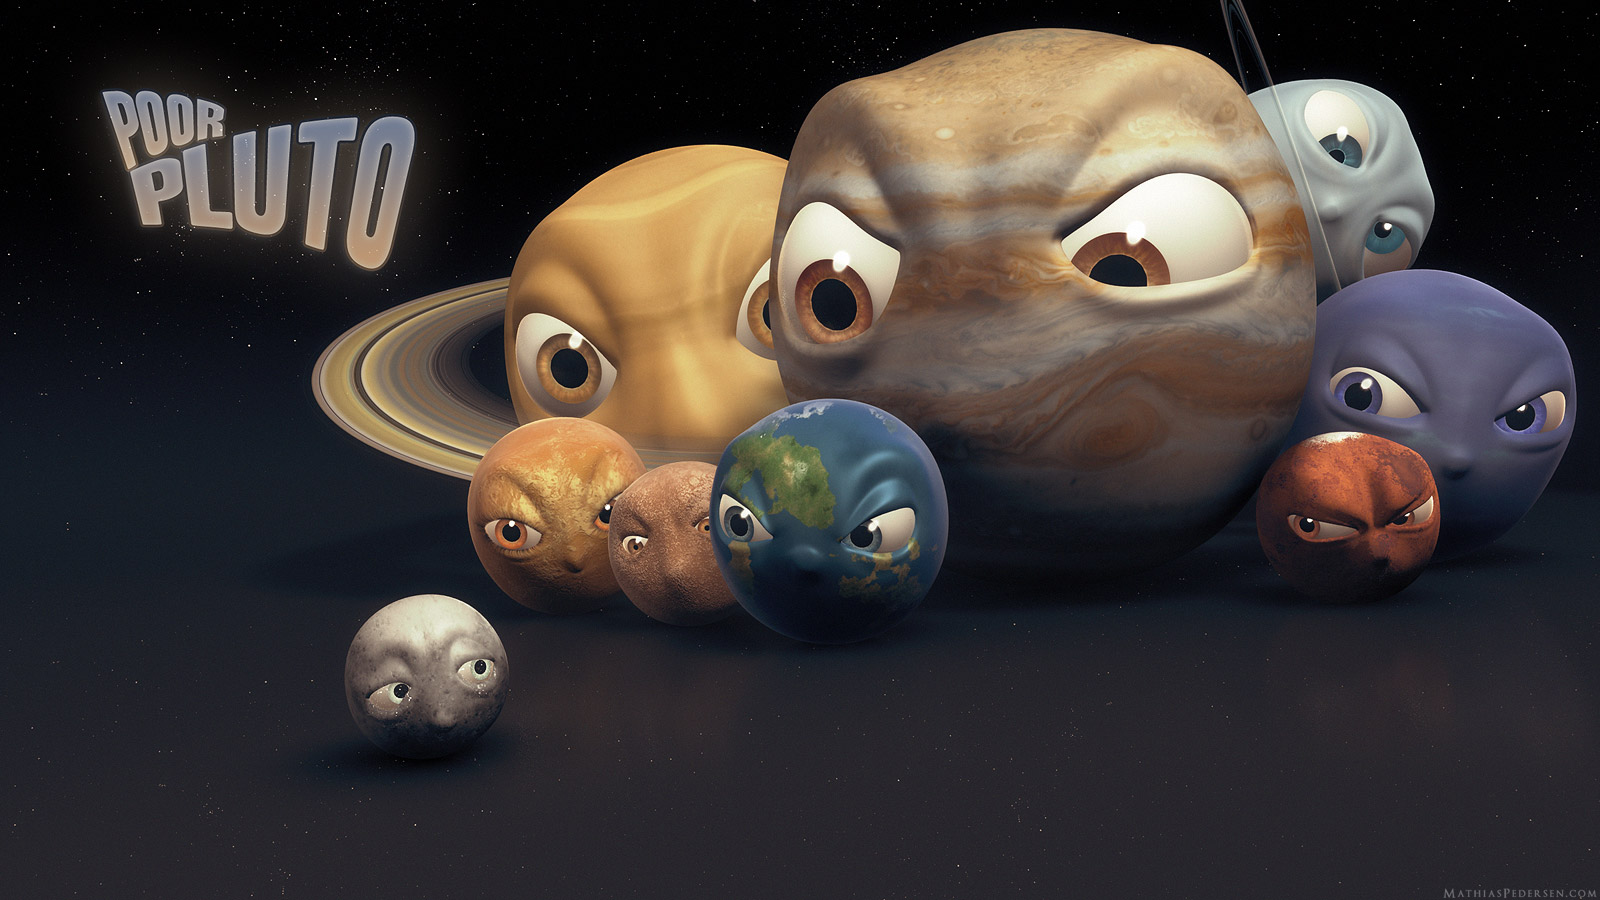 Is Pluto still called a planet?